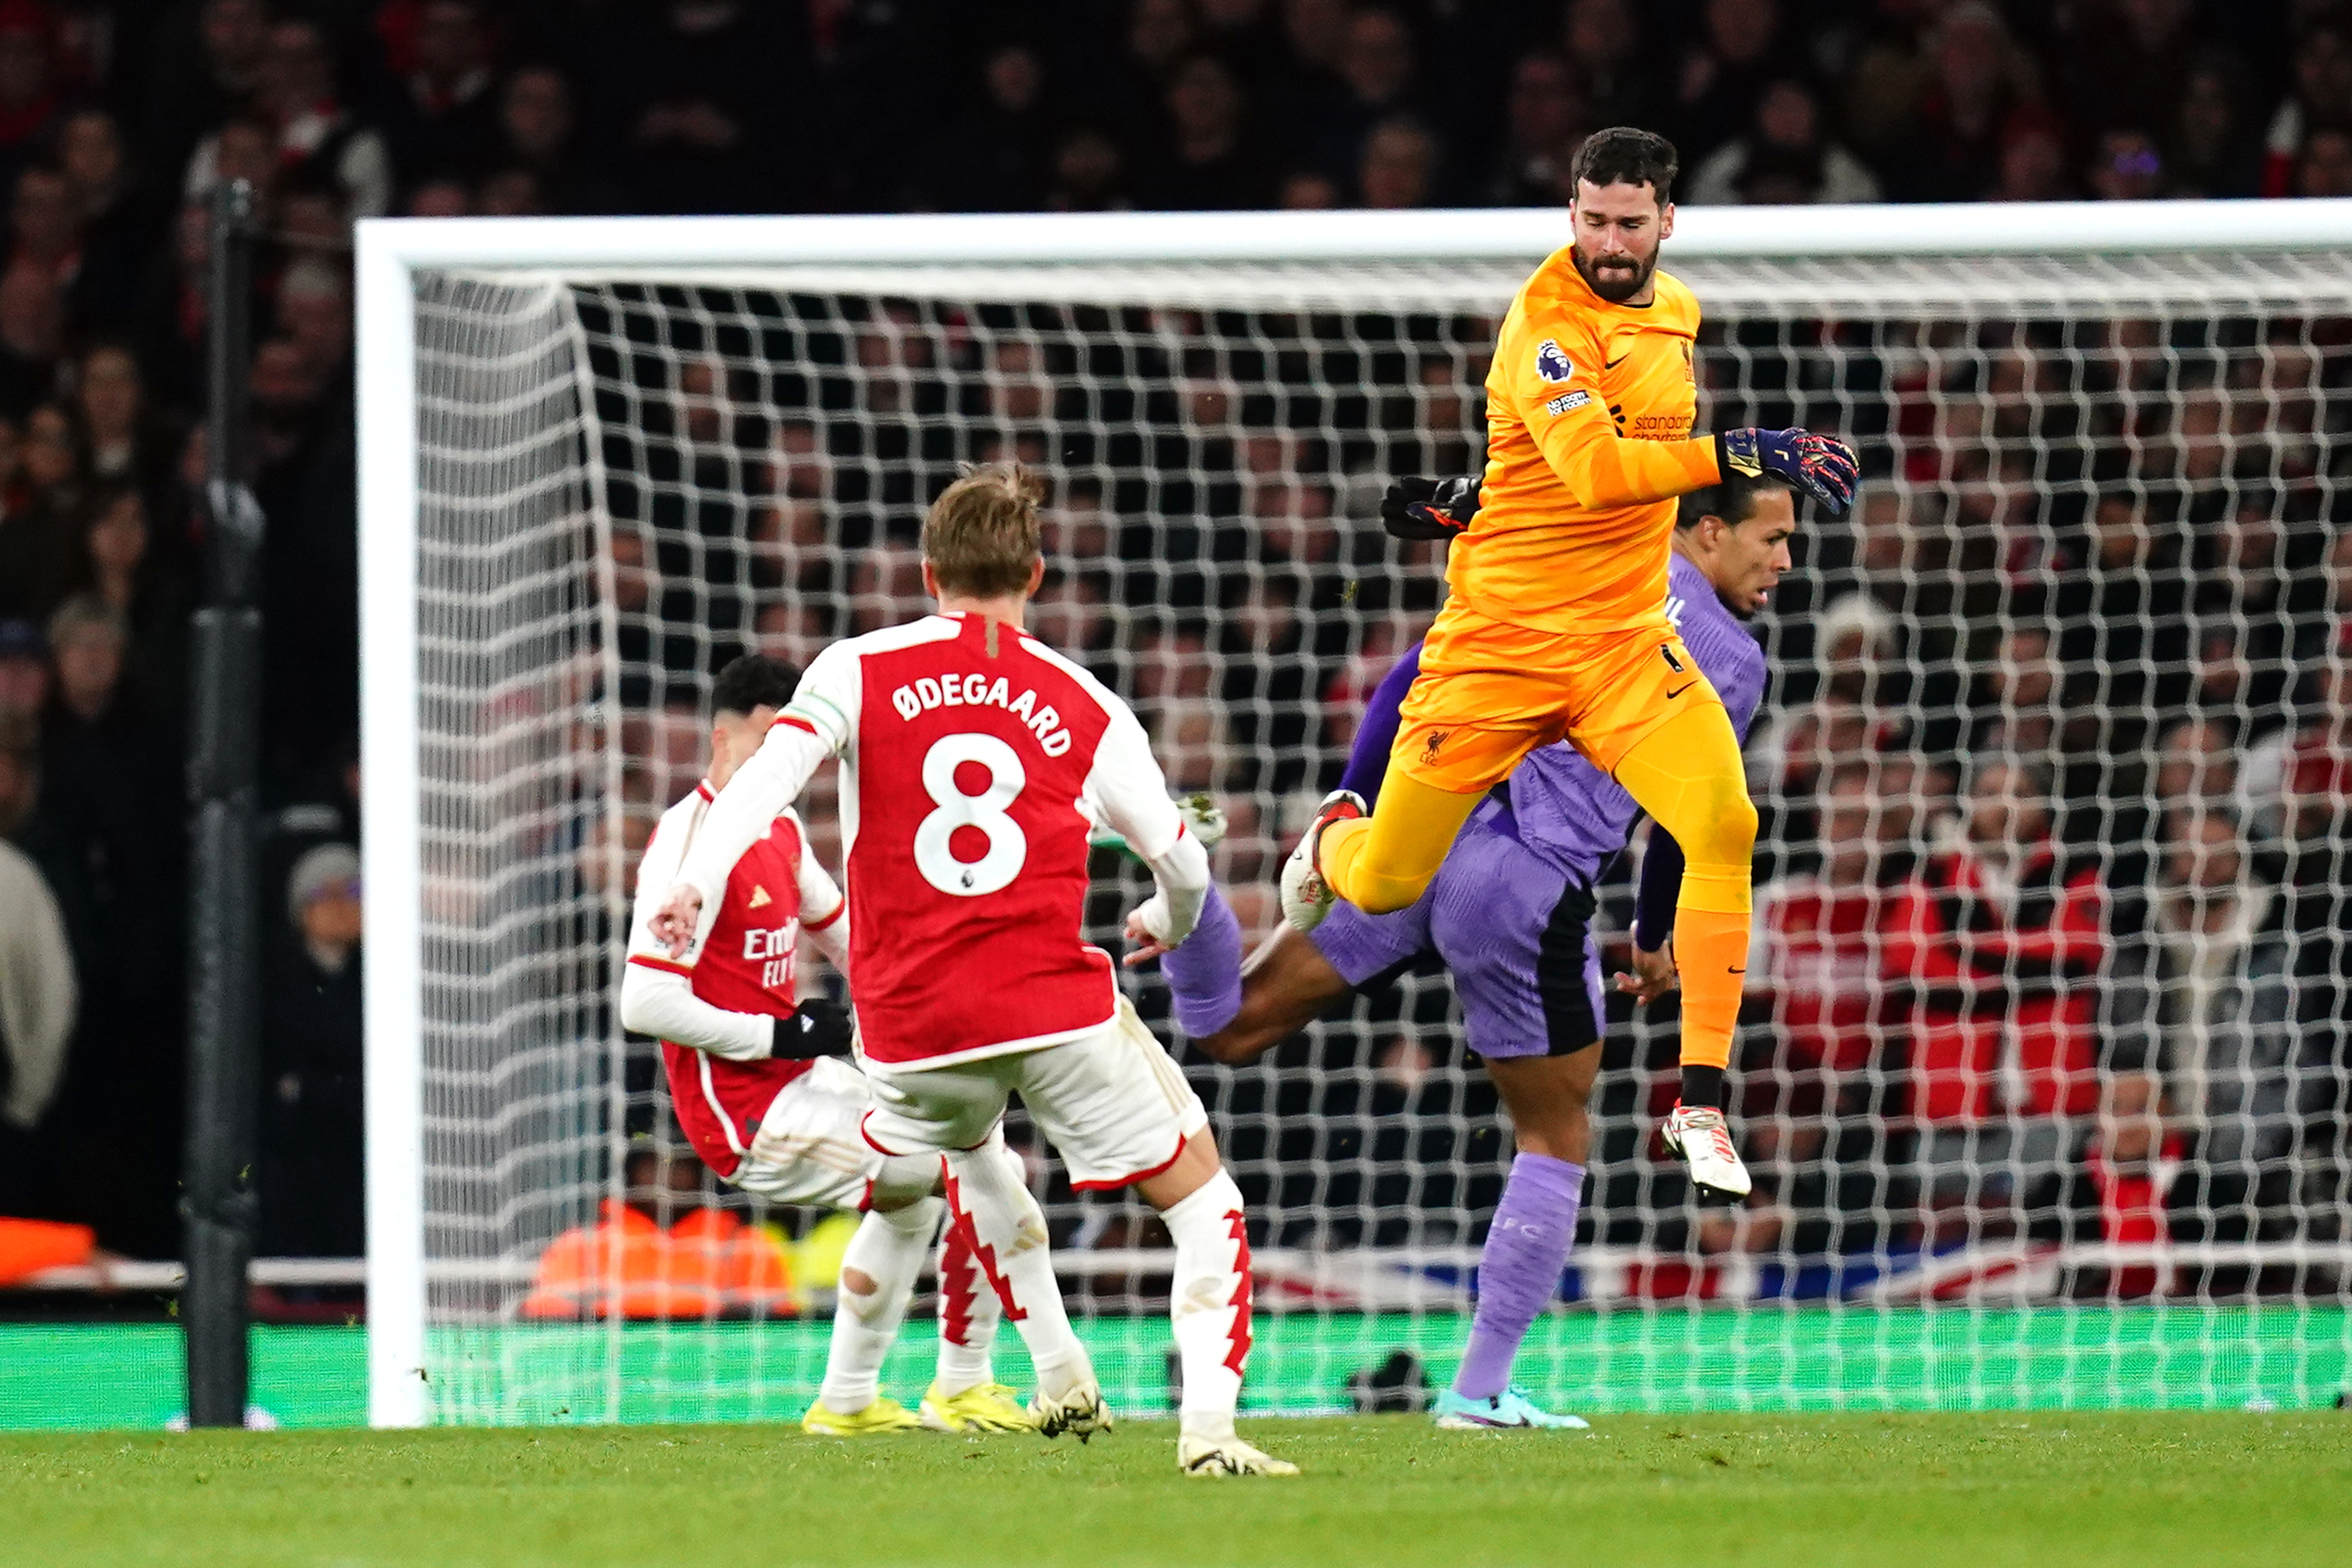 Martinelli, left, had a simple chance to make it 2-1 in the Gunners' 3-1 victory after confusion between Liverpool duo Alisson and Van Dijk